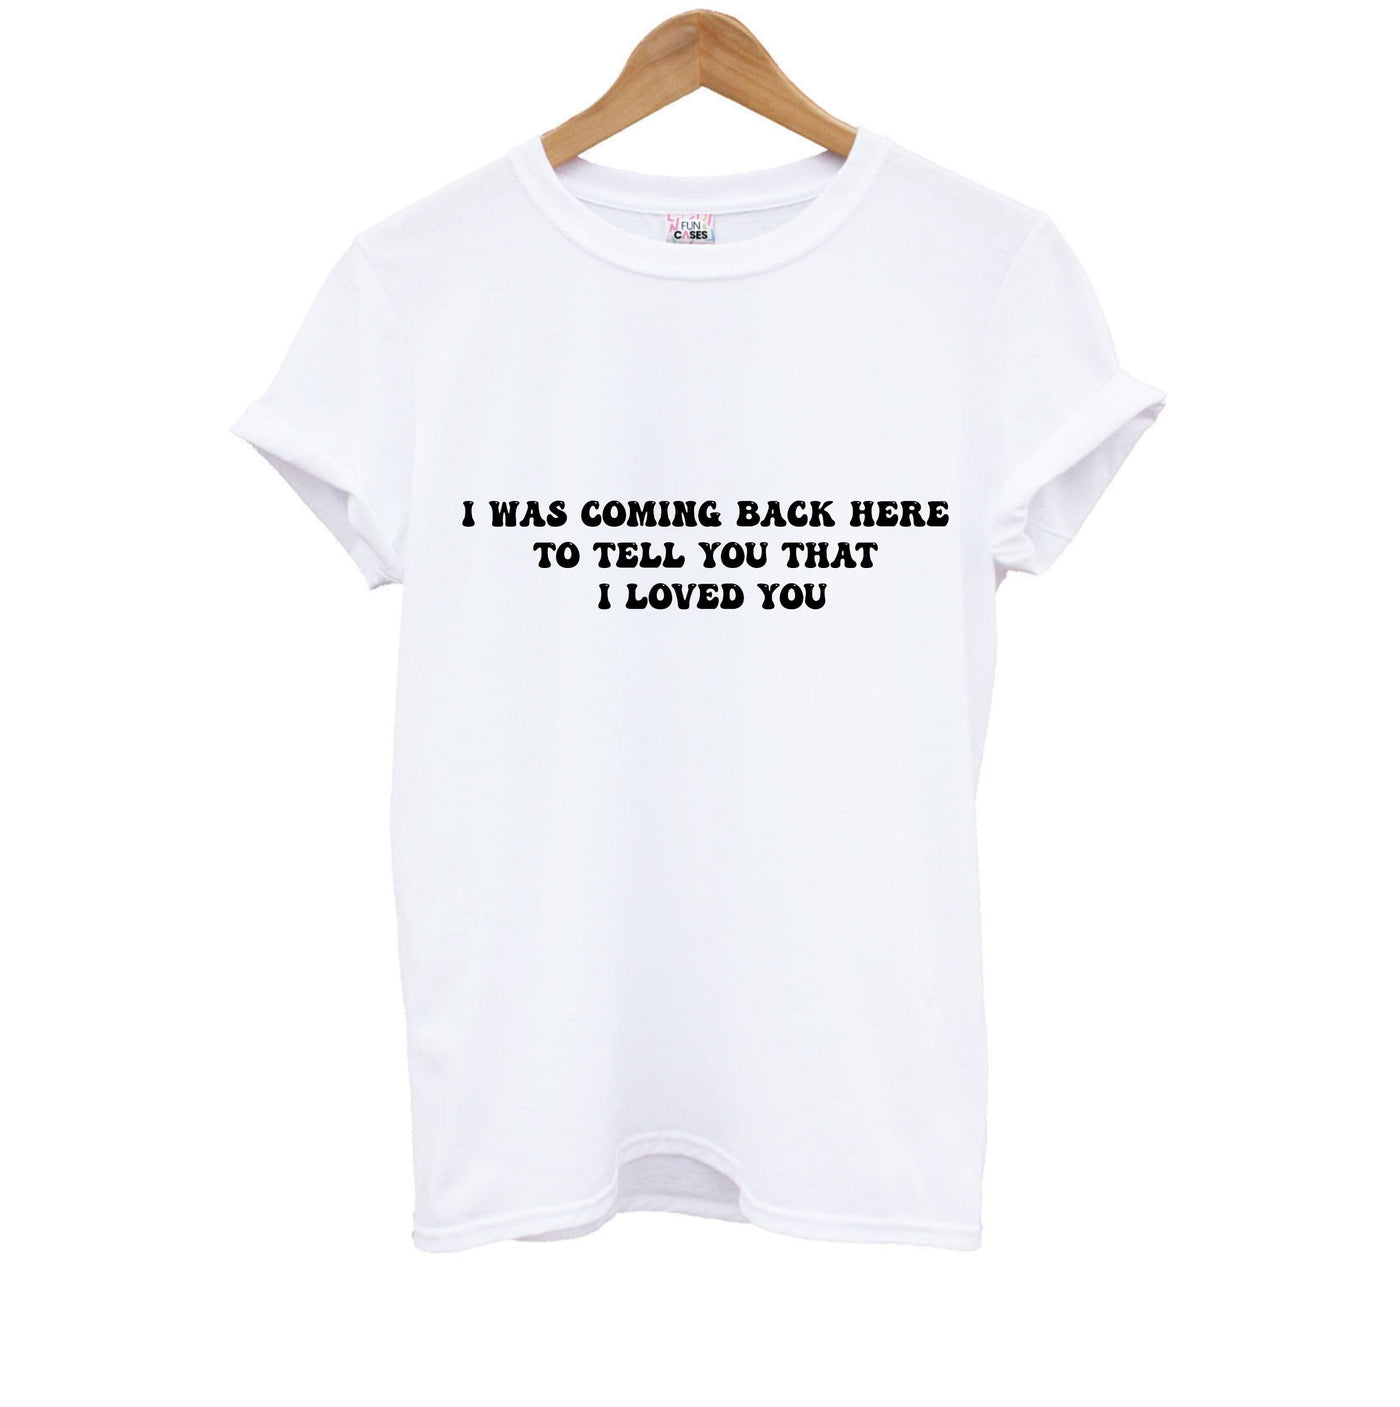 I Was Coming Back Here To Tell You That I Loved You - Islanders Kids T-Shirt